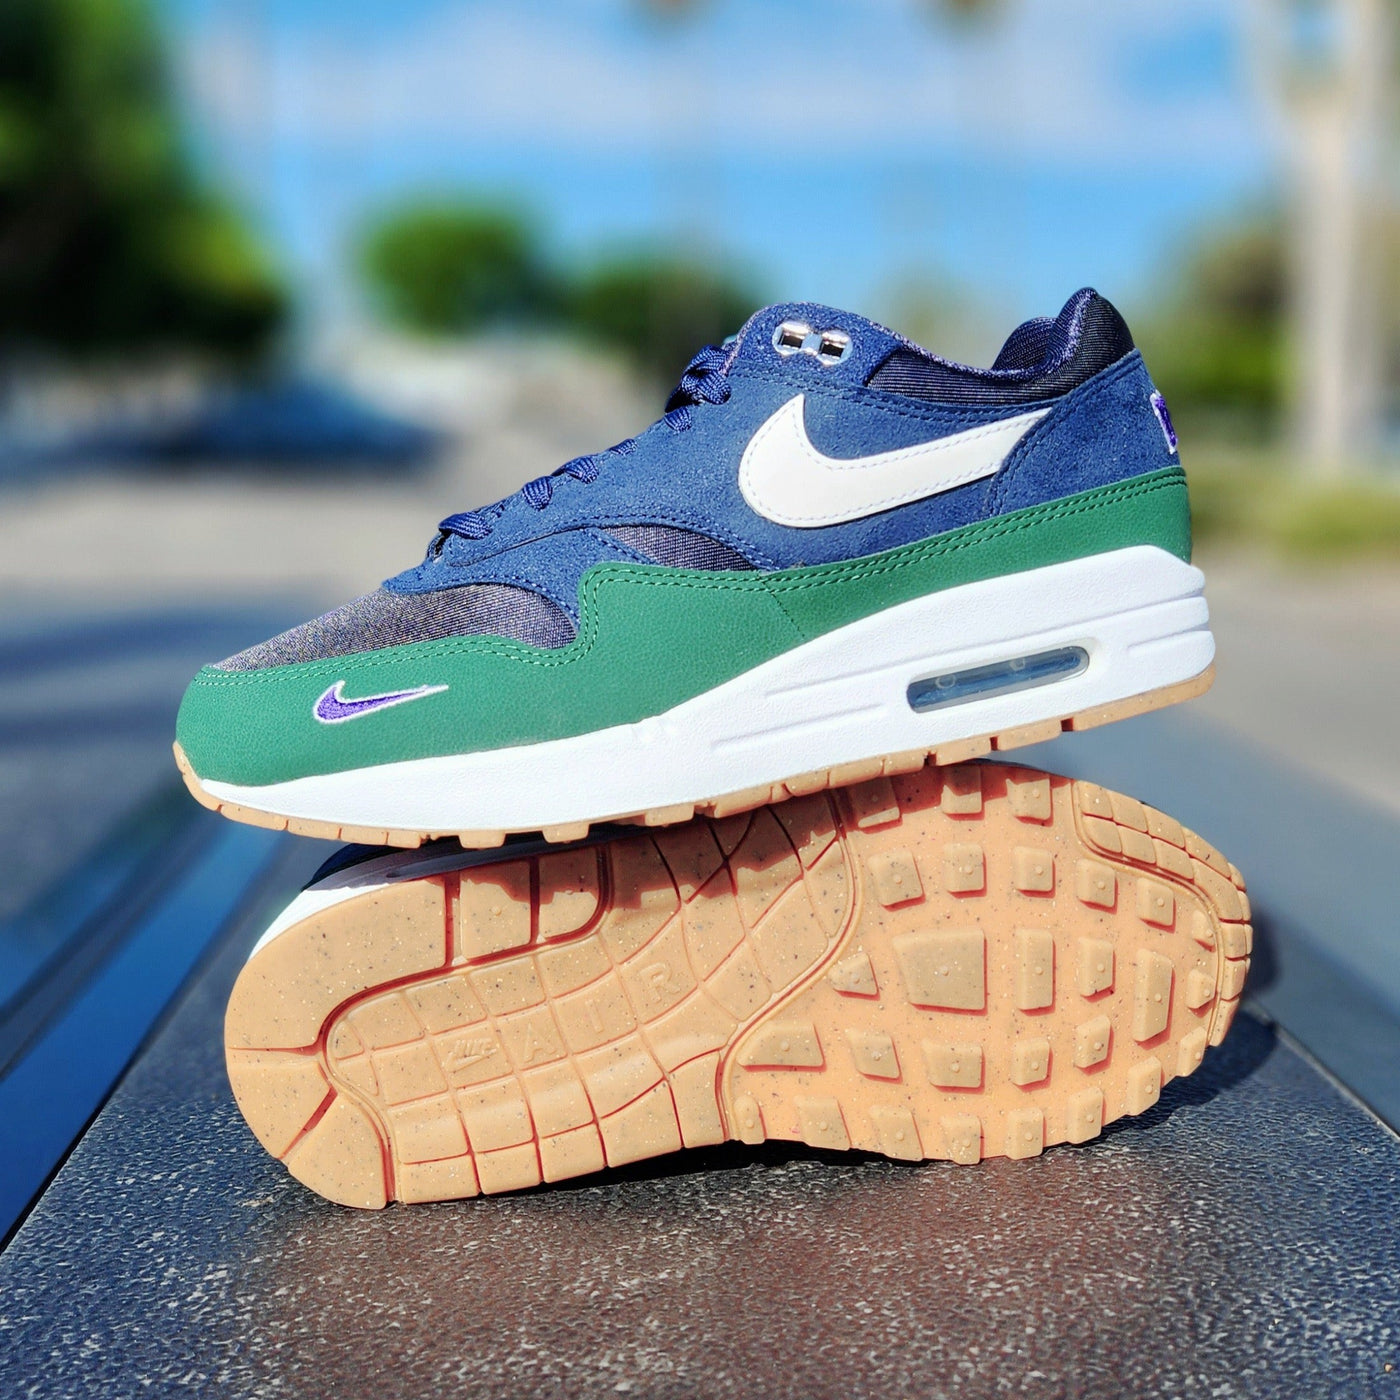 Nike Air Max 1 '87 Obsidian Gorge Green On Foot Sneaker Review